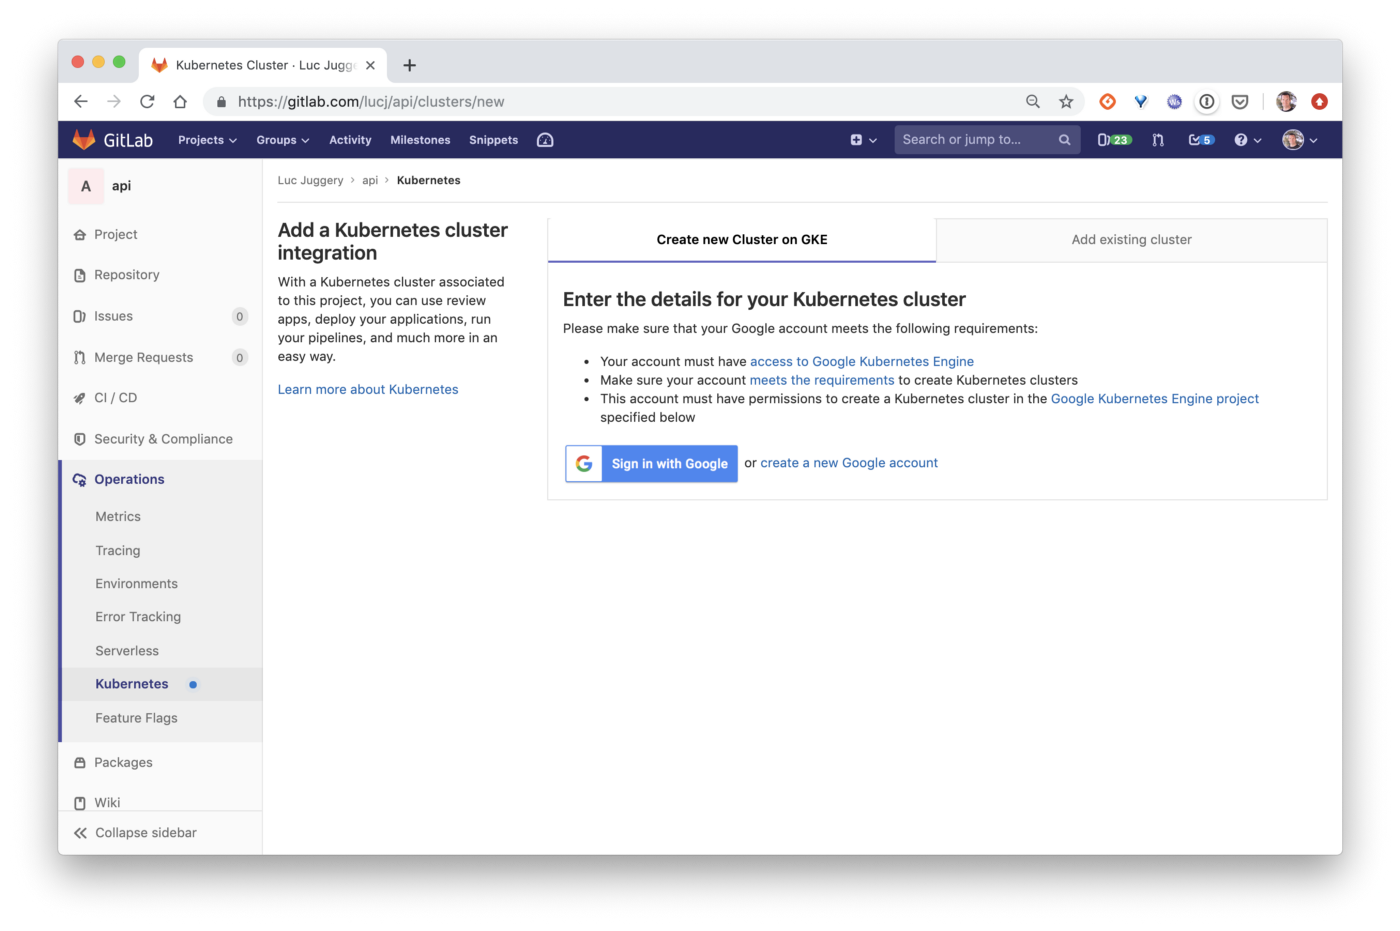 content/wechat/articles/2020/05/2020-05-06-using-a-k3s-kubernetes-cluster-for-your-gitlab-project/create-cluster-on-GKE.png